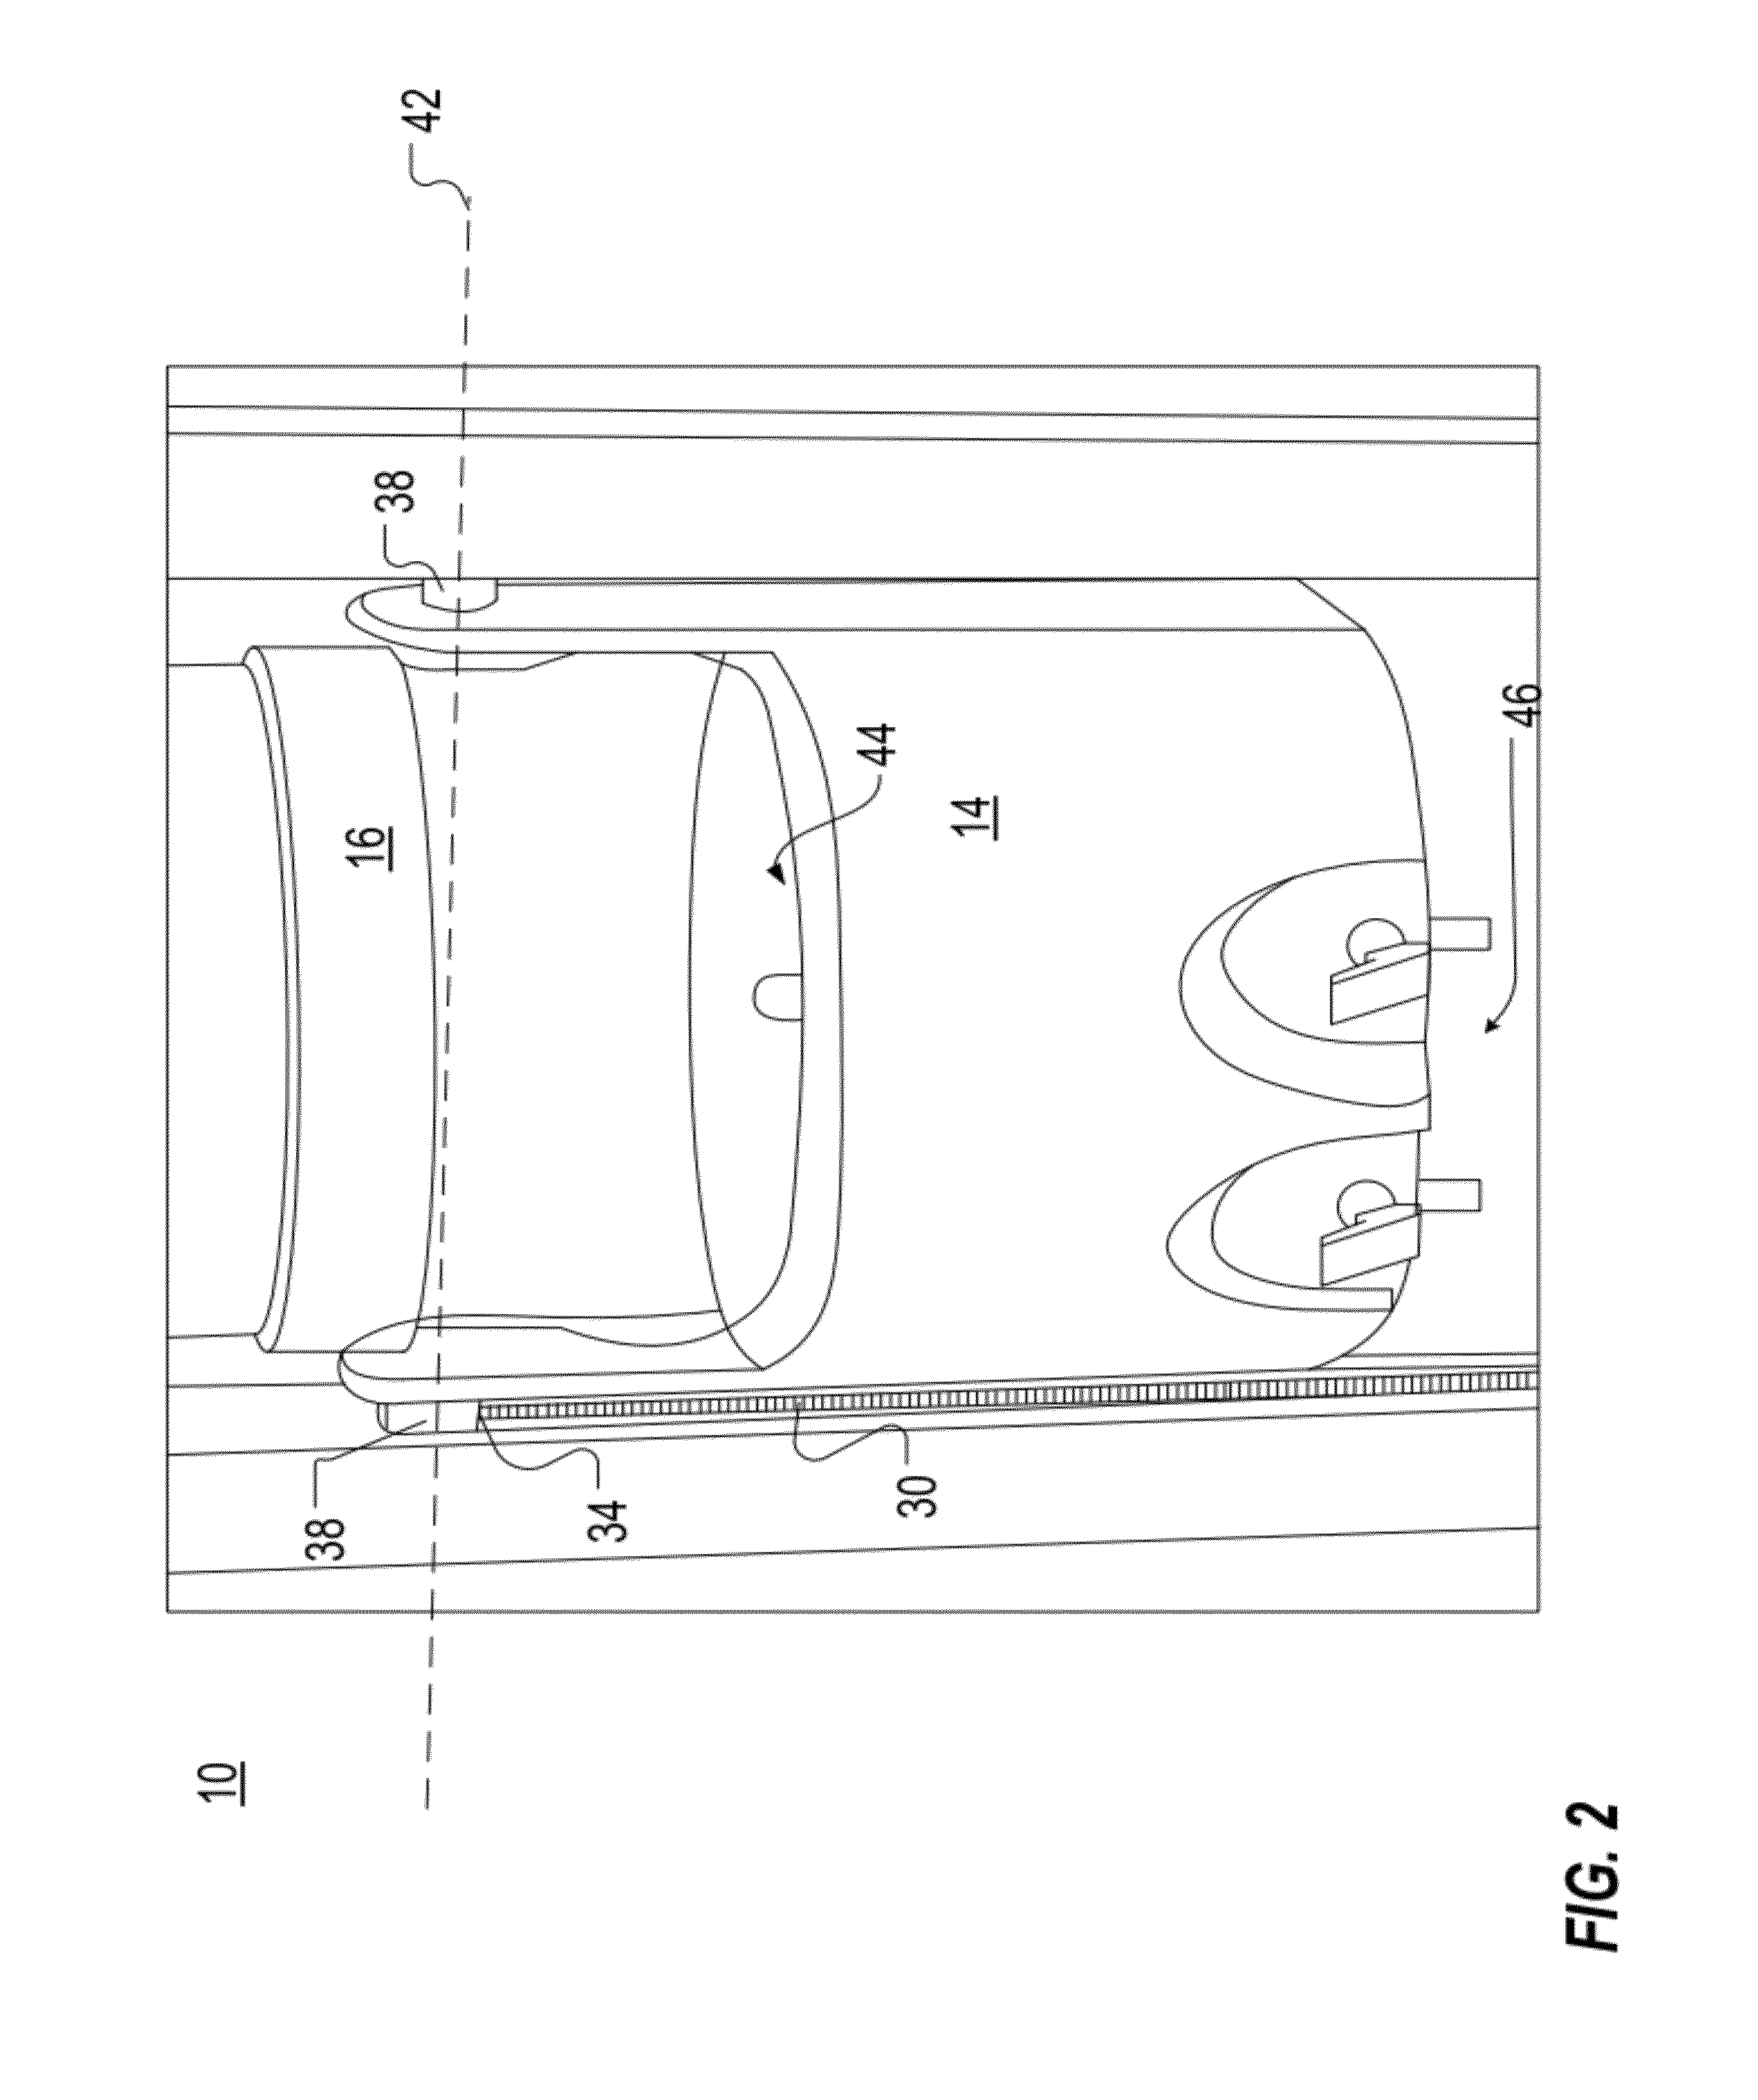 Lifting and rotating water reservoir with attached water bottle for dispensing of water from water cooler